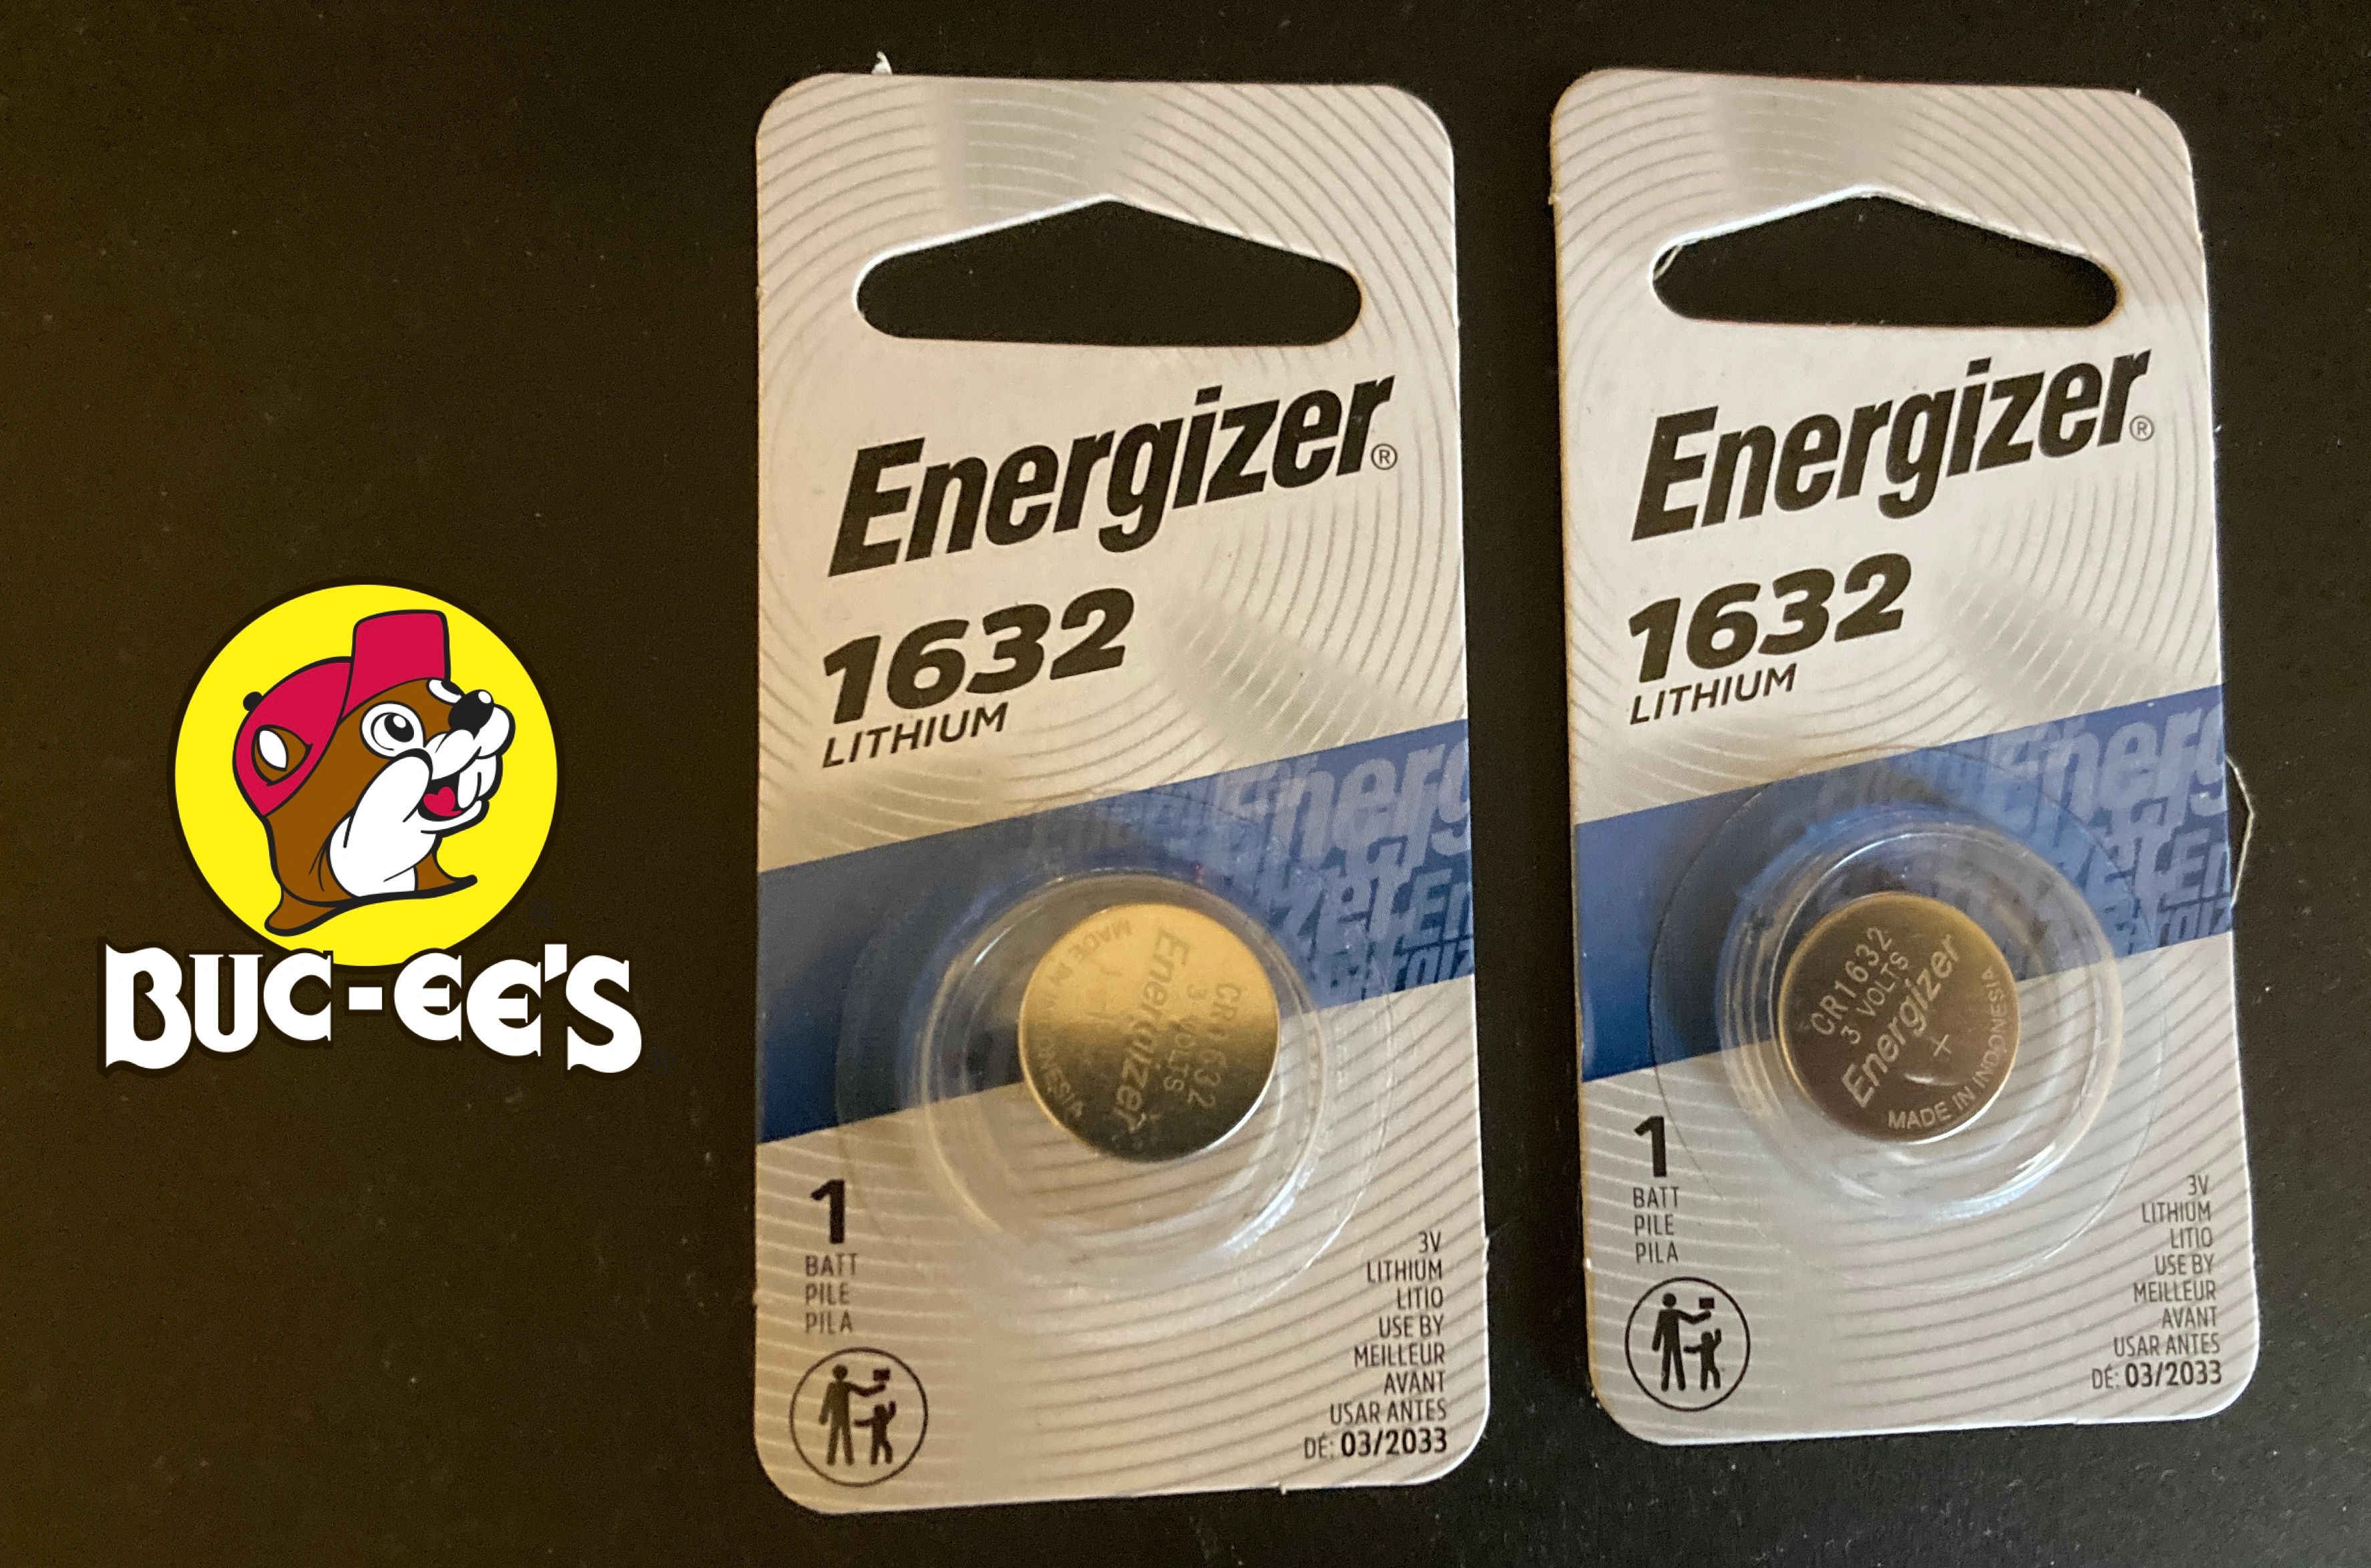 Buc-ee's logo and Energizer batteries